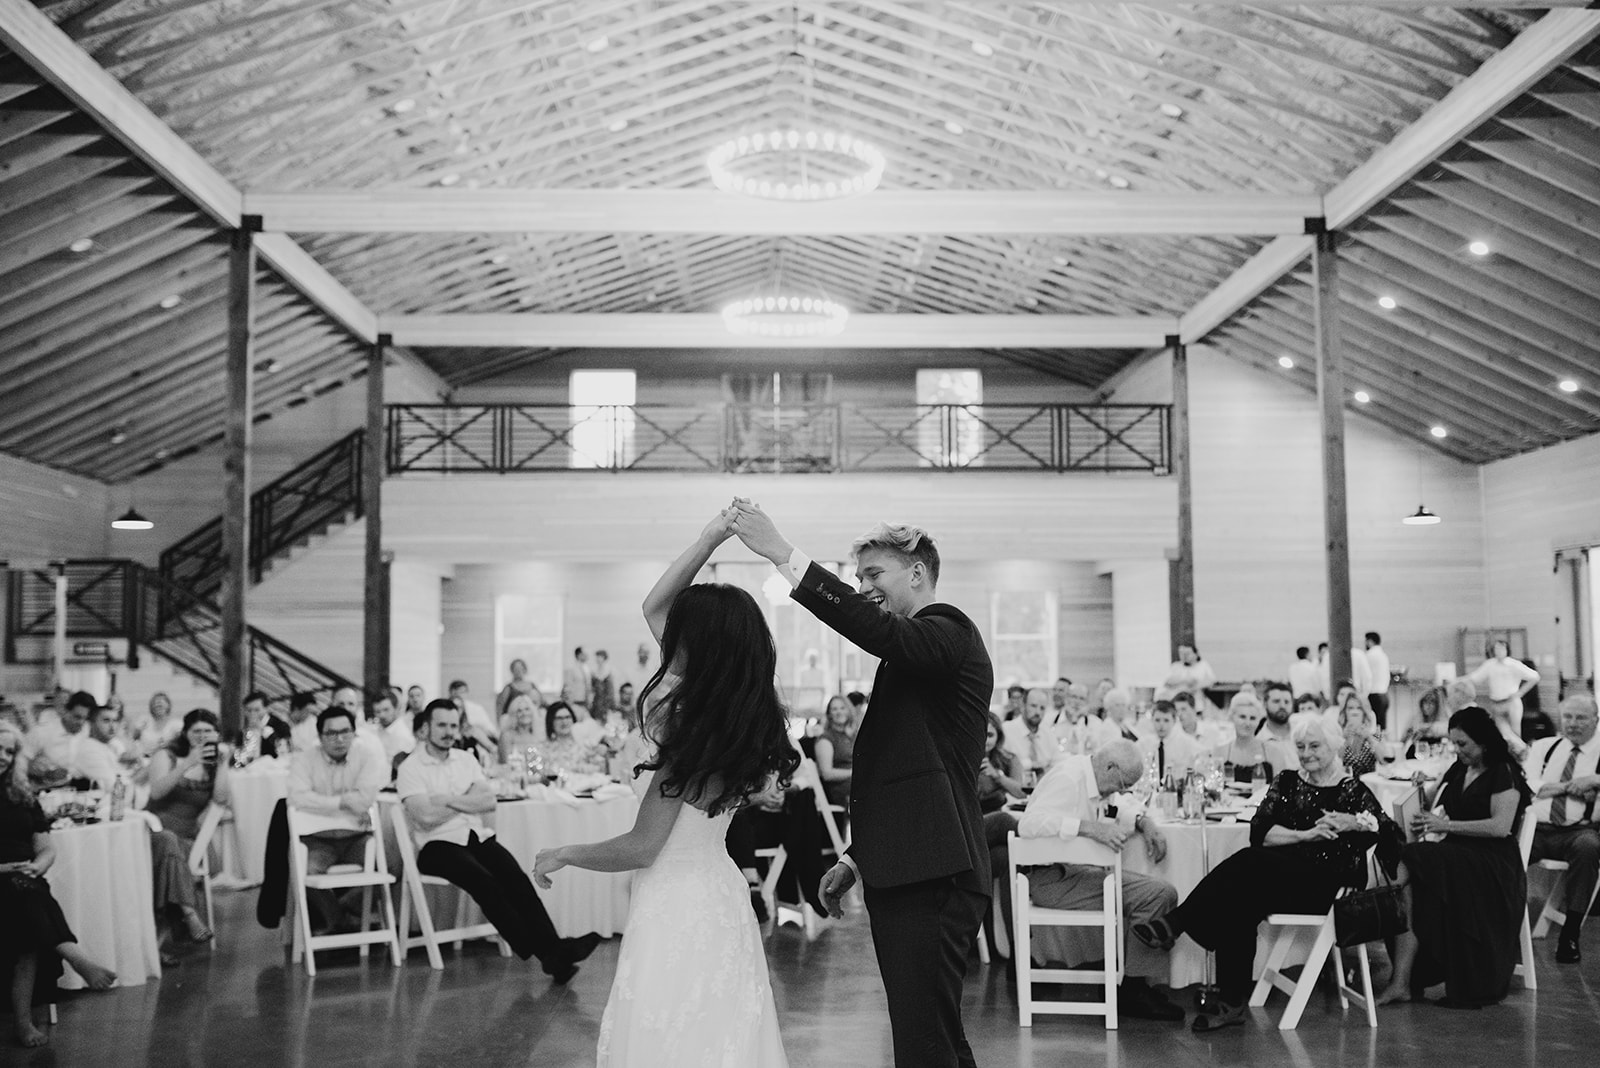 A black and white photo of a bride and groom sharing their first dance in a rustic venue, with the groom spinning the bride while guests look on and smile, capturing the joyous atmosphere.